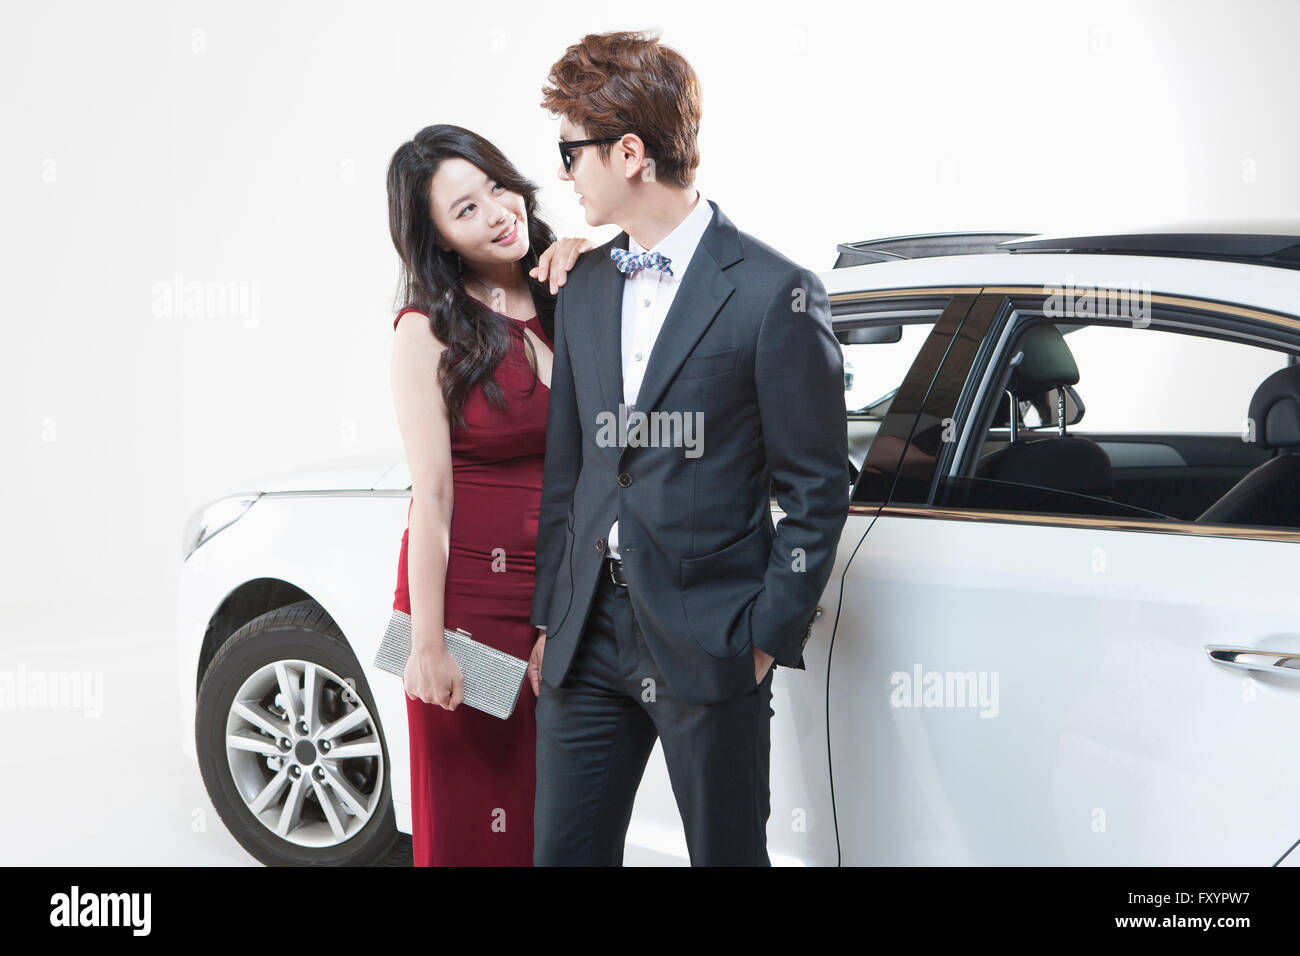 Young woman in dress and young man in suit smiling at each other in front of a fancy car Stock Photo